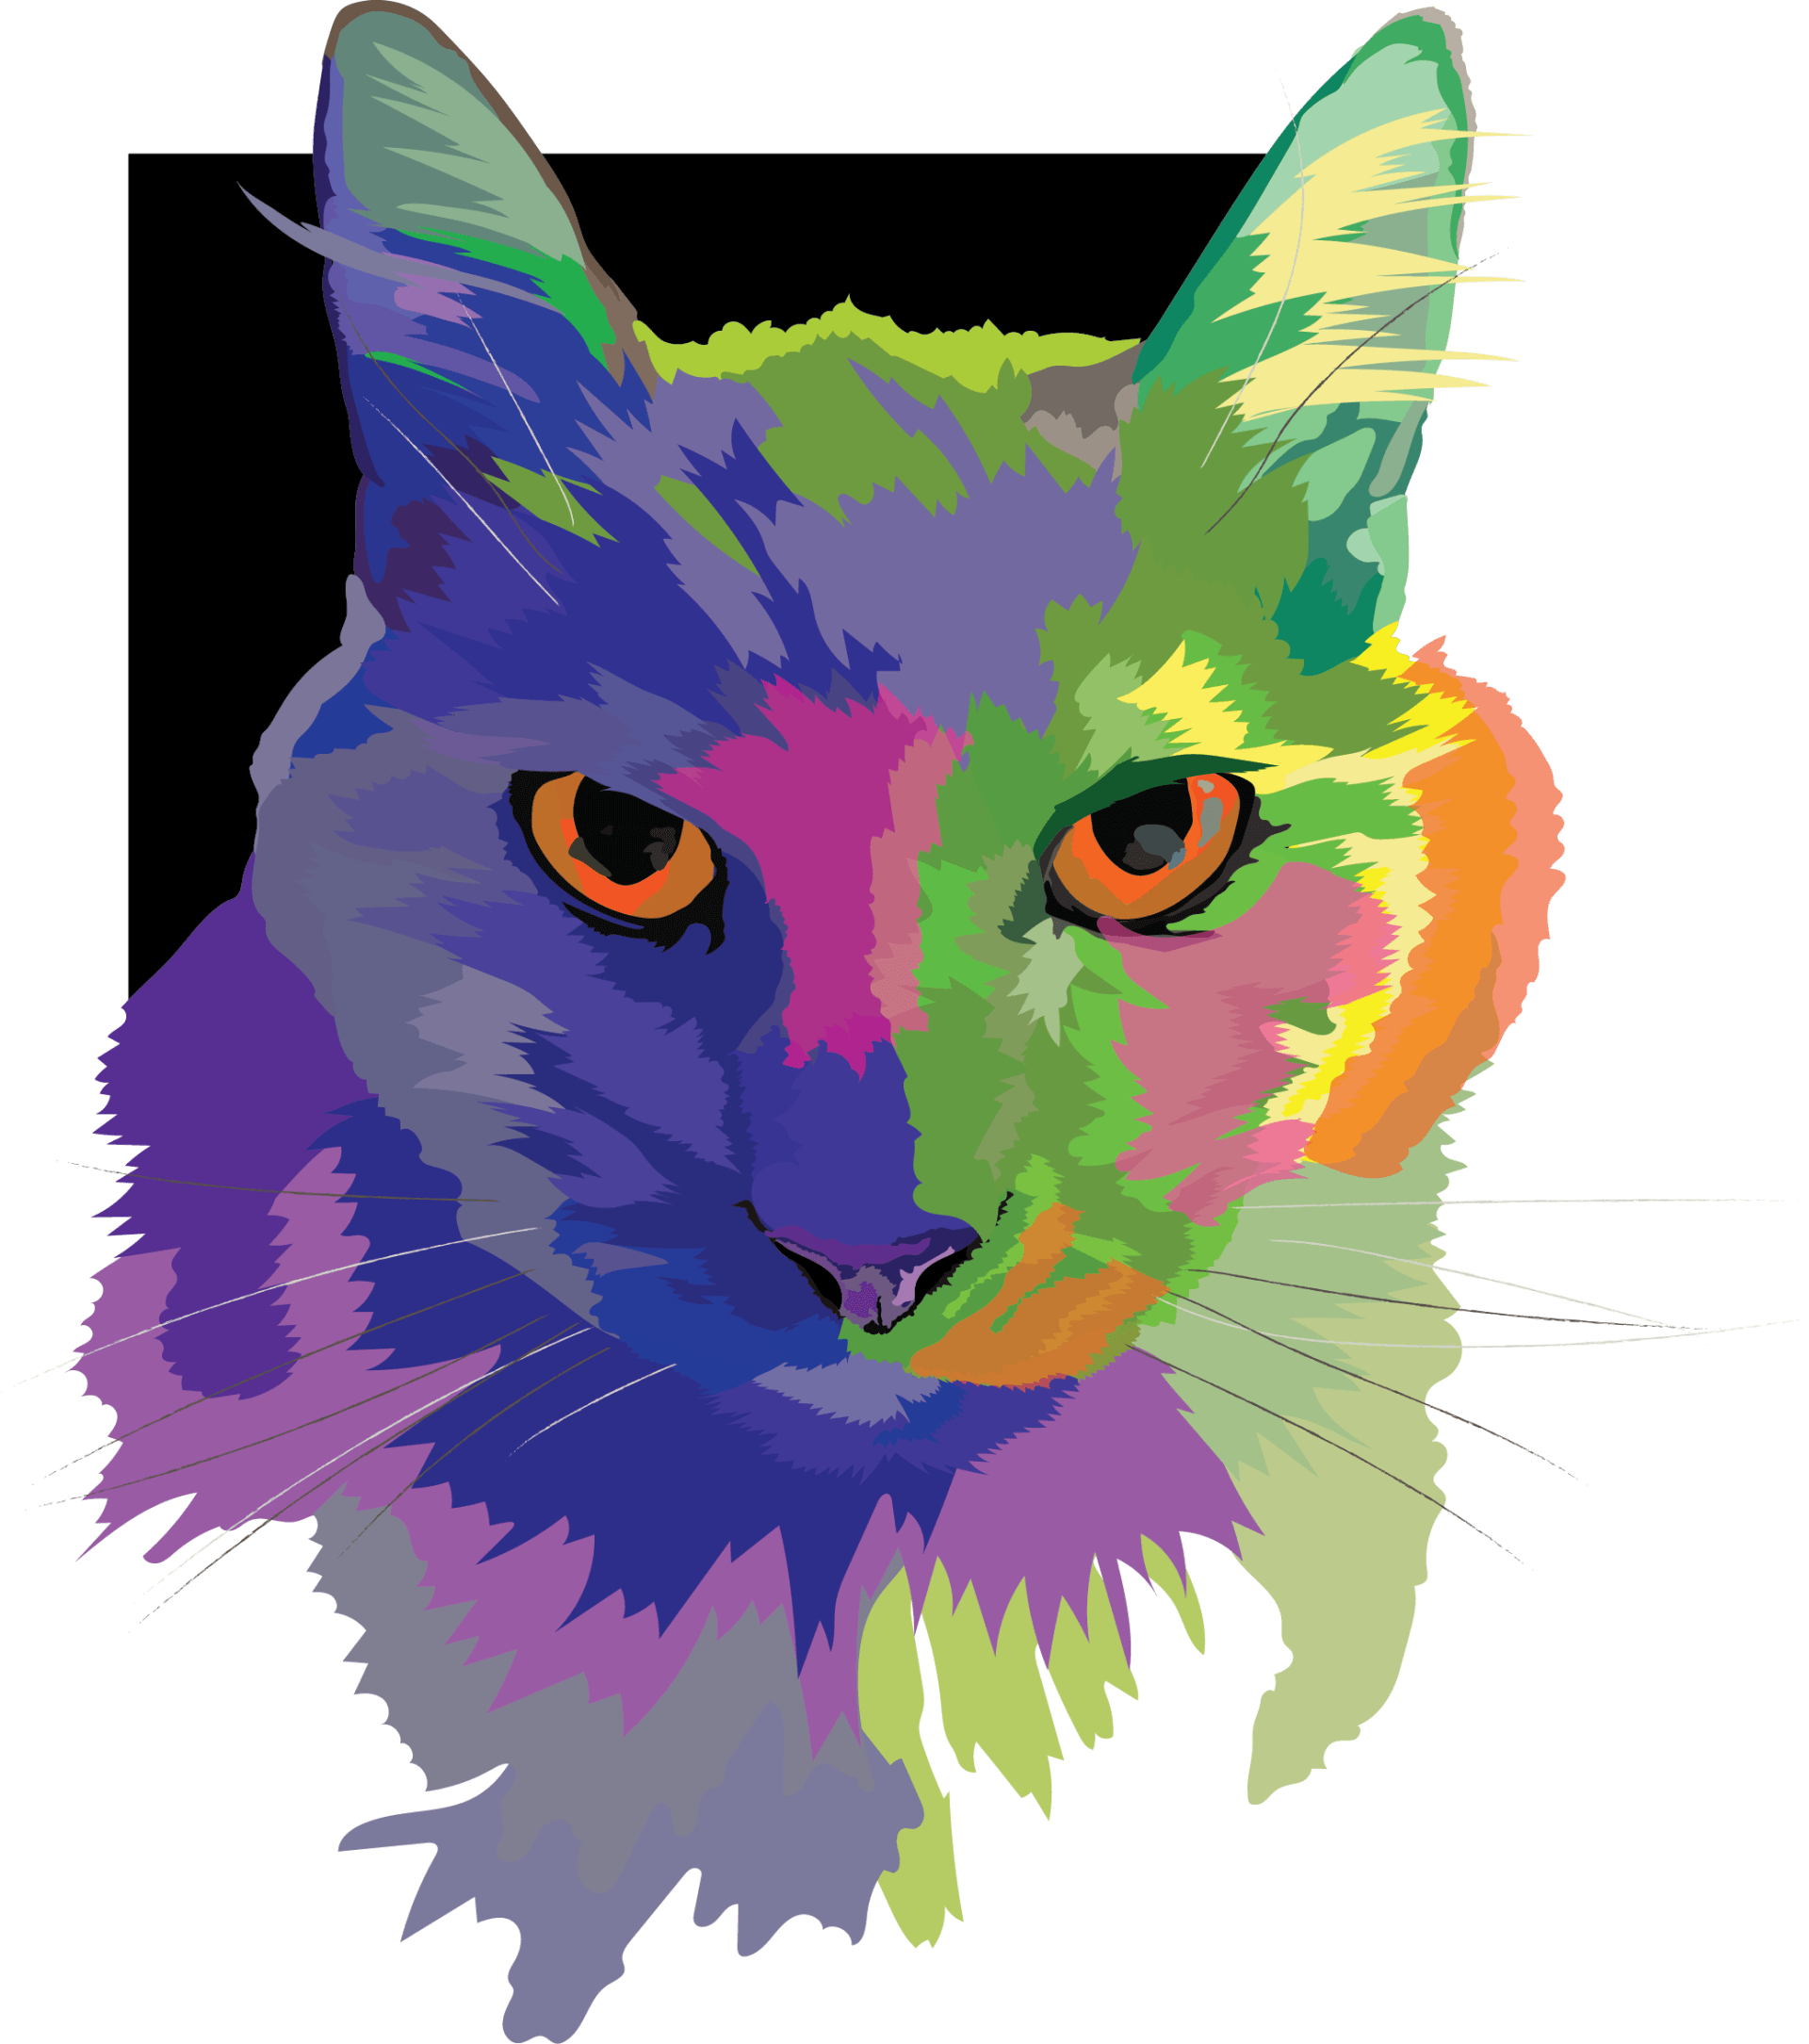 Digital portrait in neon colors featuring Spell the cat